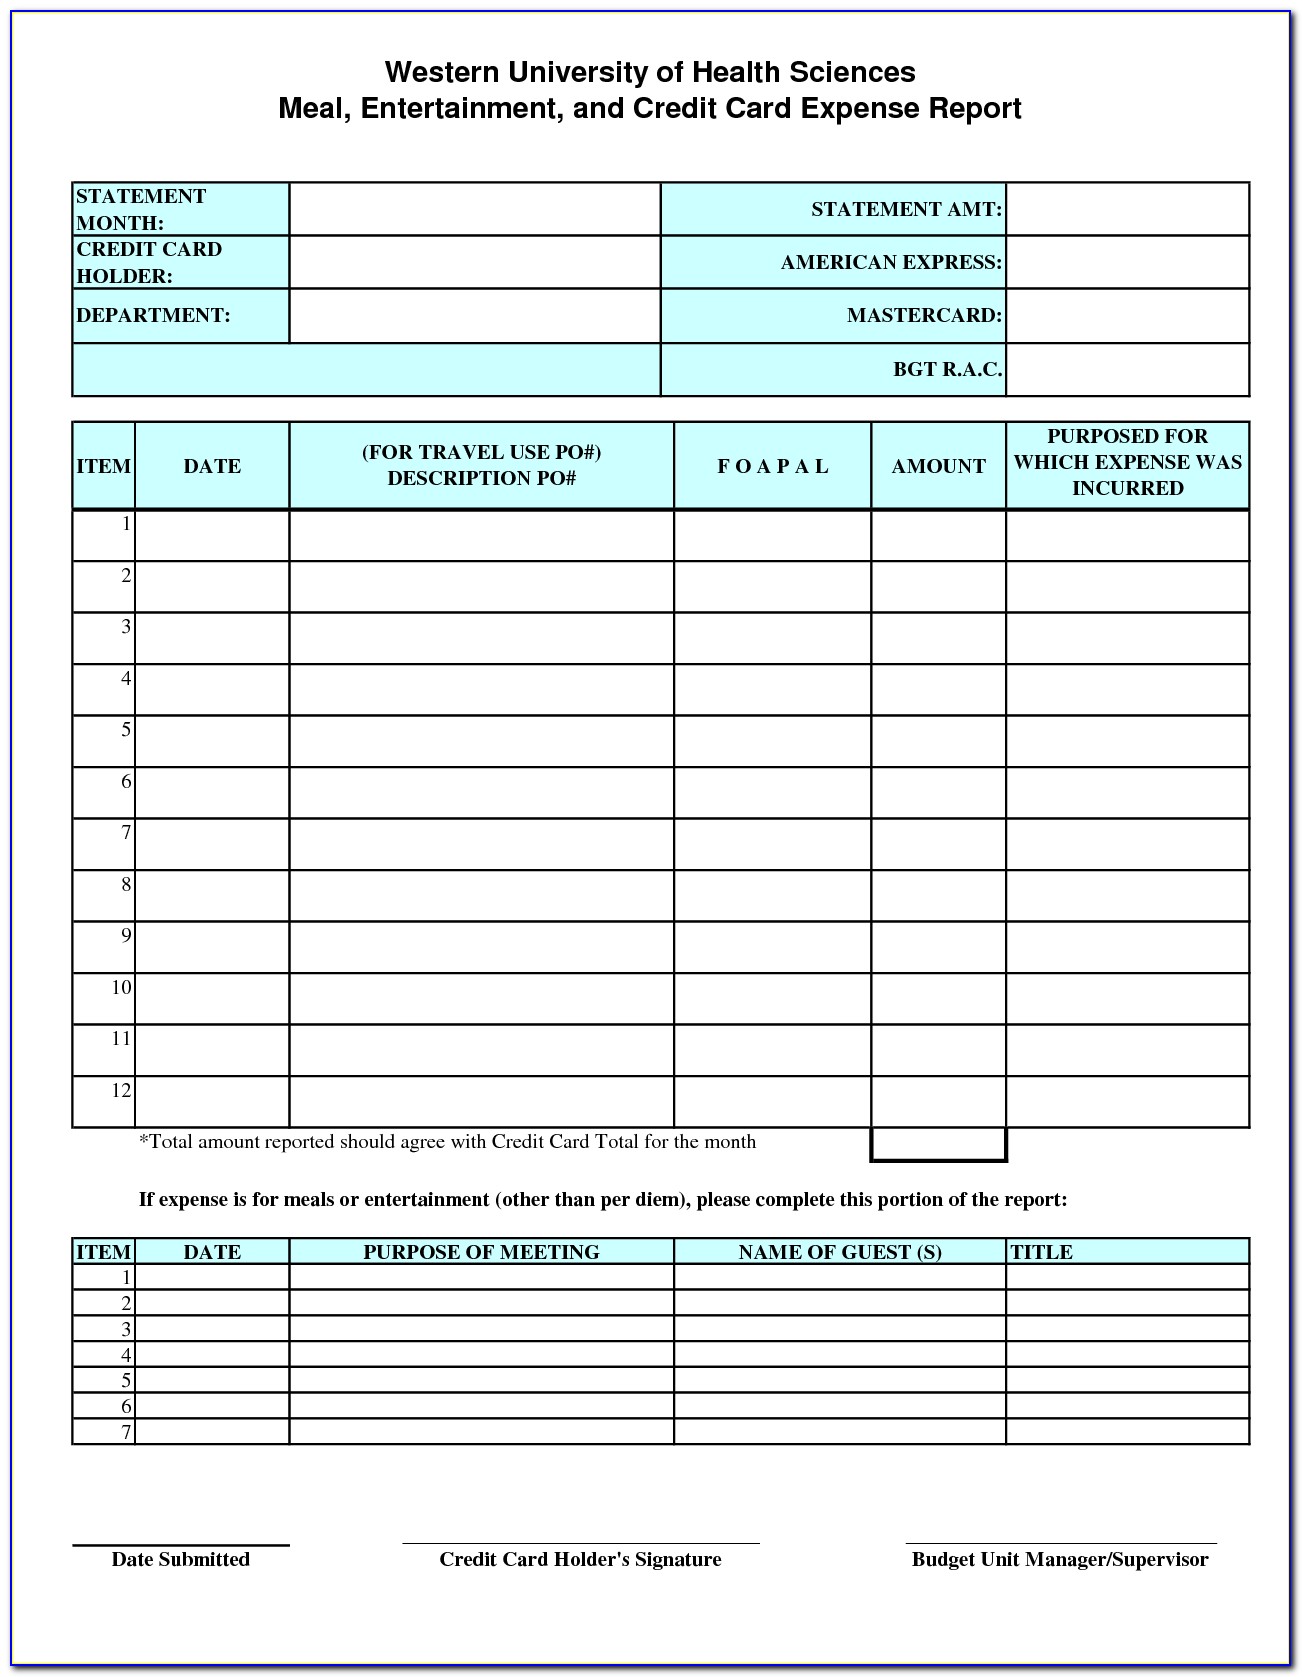 Credit Card Expense Report Form